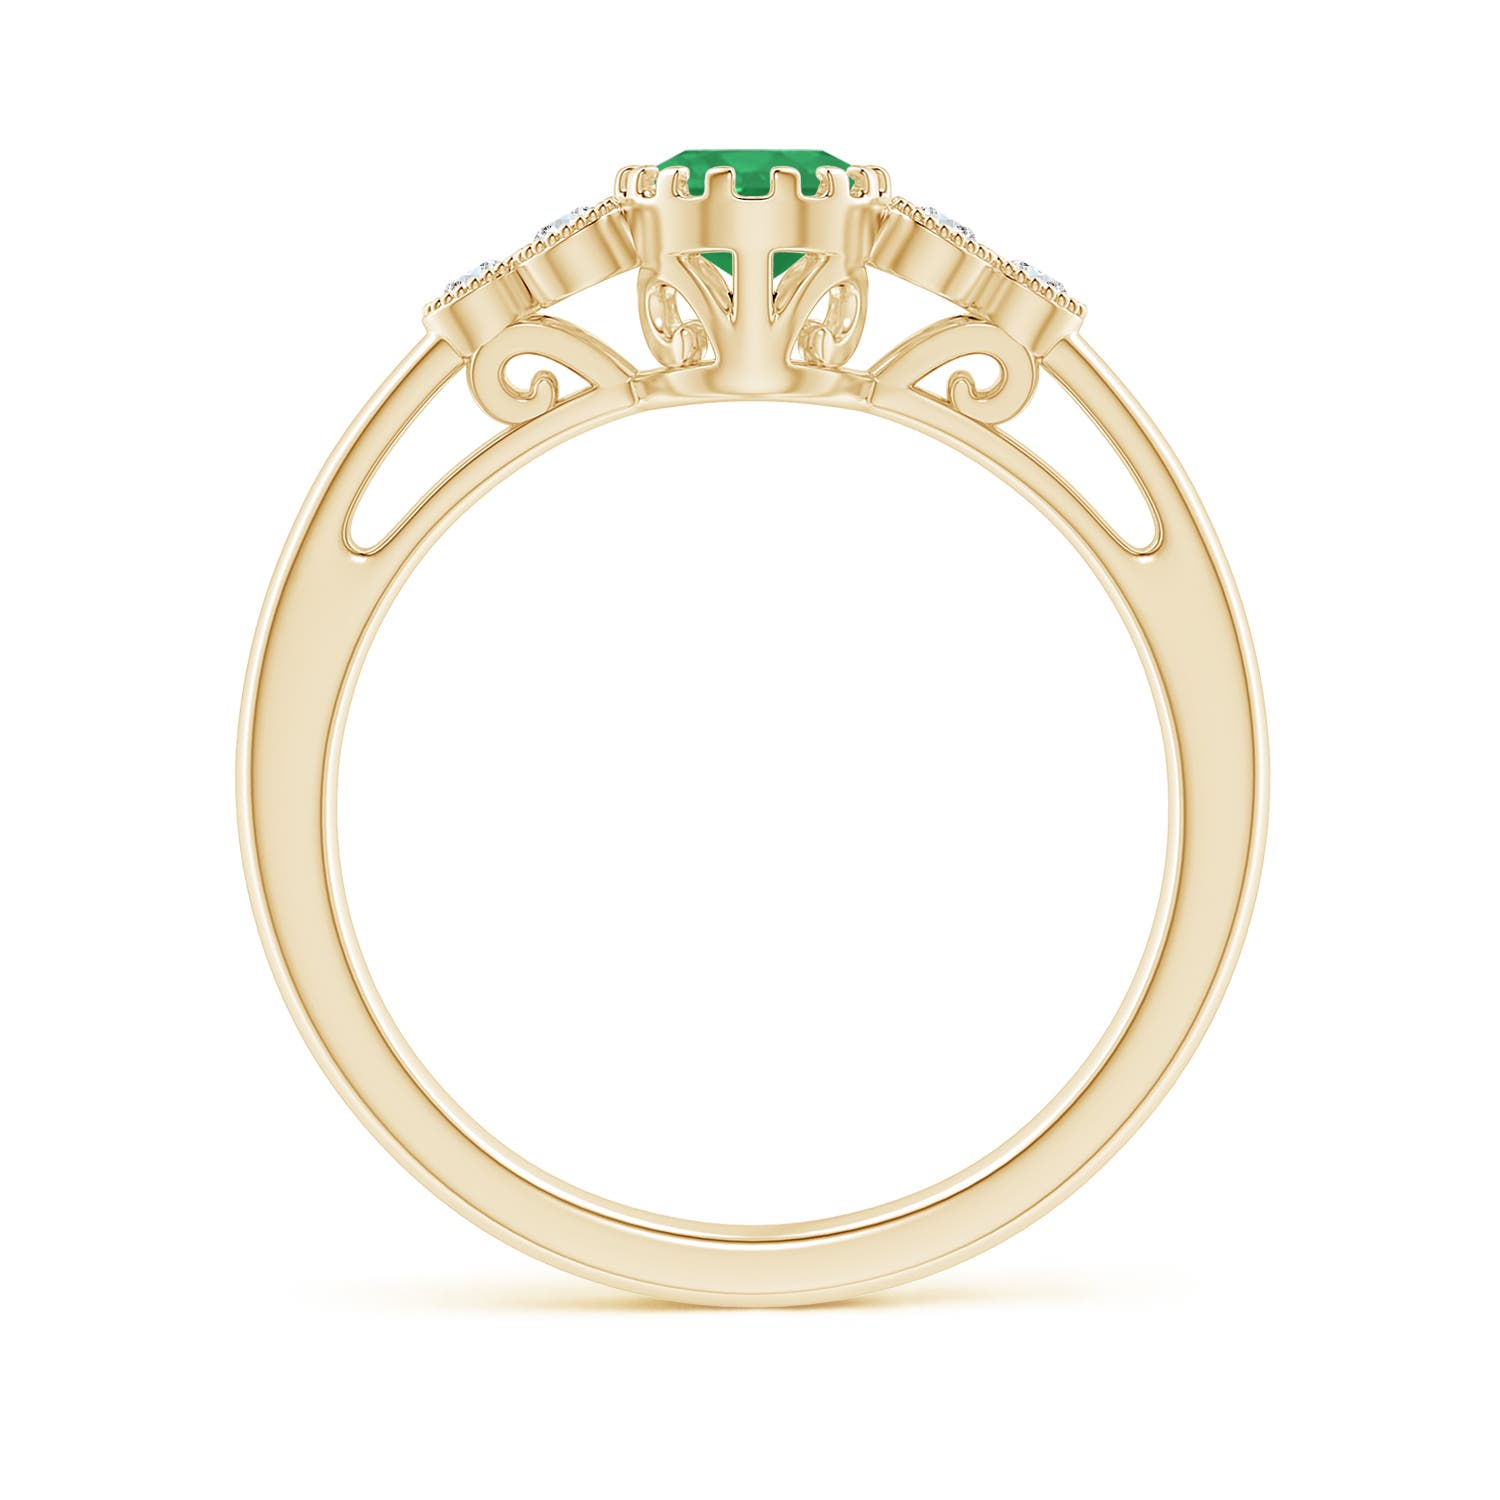 A - Emerald / 0.8 CT / 14 KT Yellow Gold